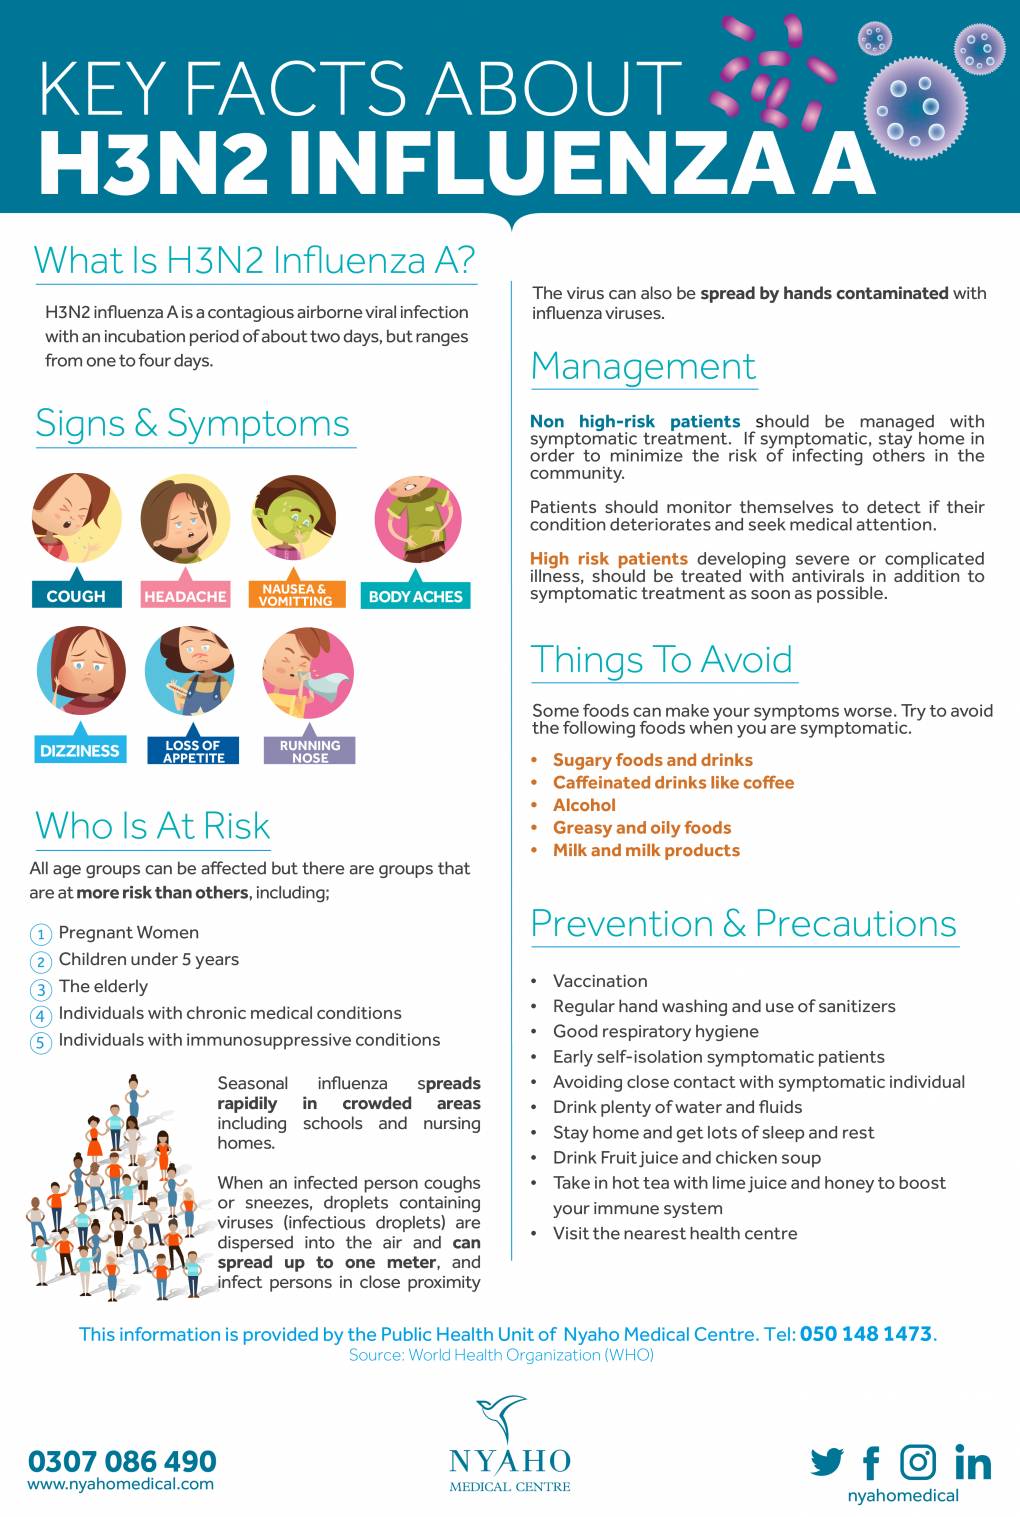 What is the incubation period for influenza a